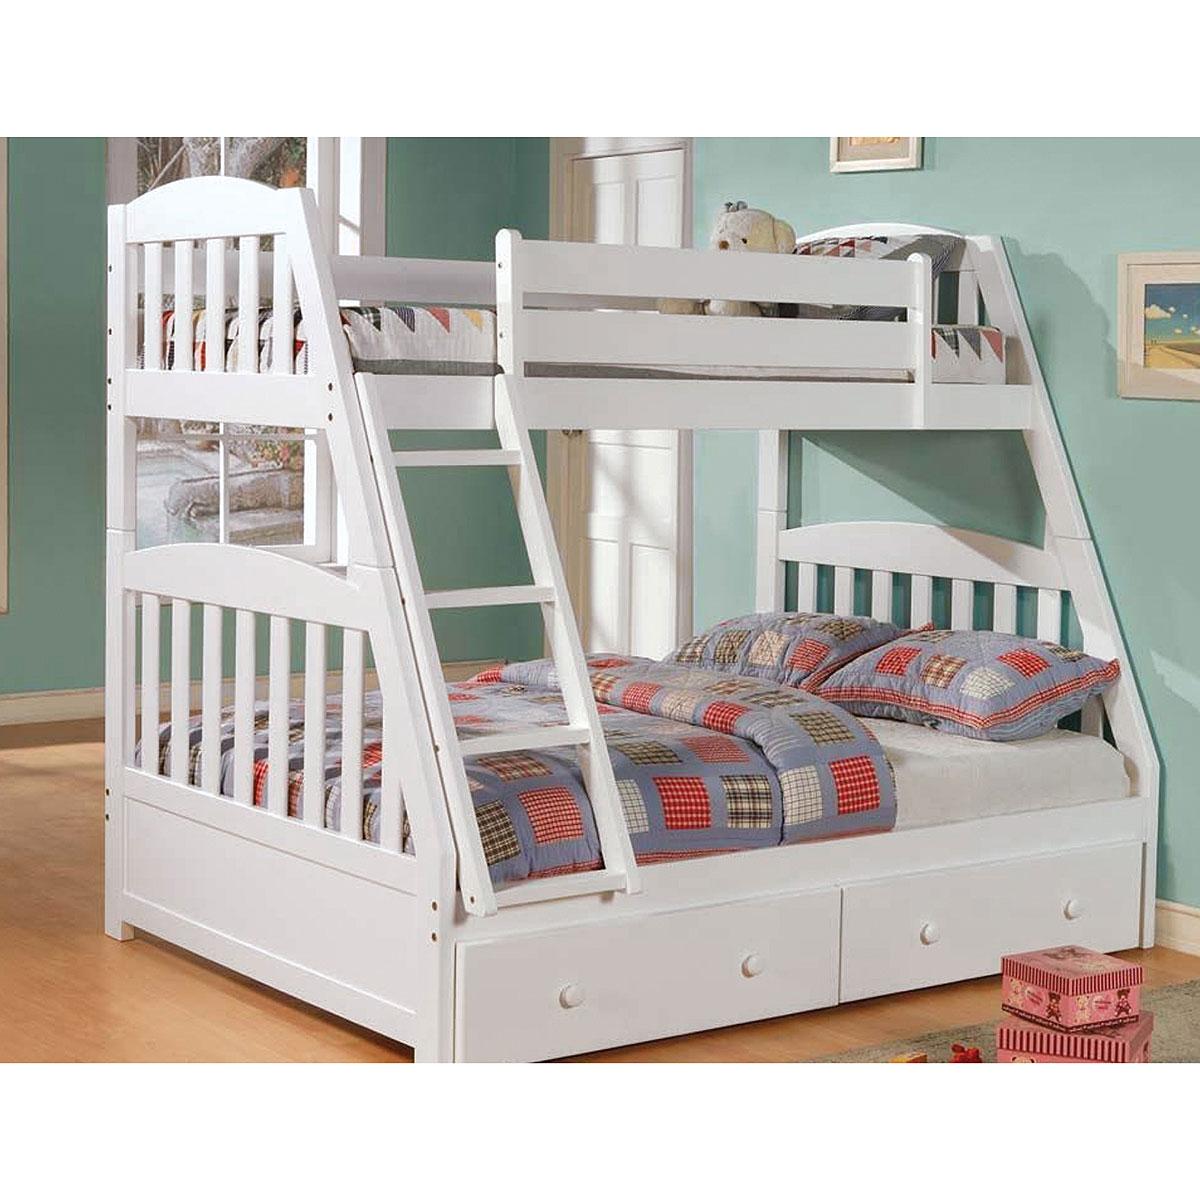 twin beds for little boys photo - 5